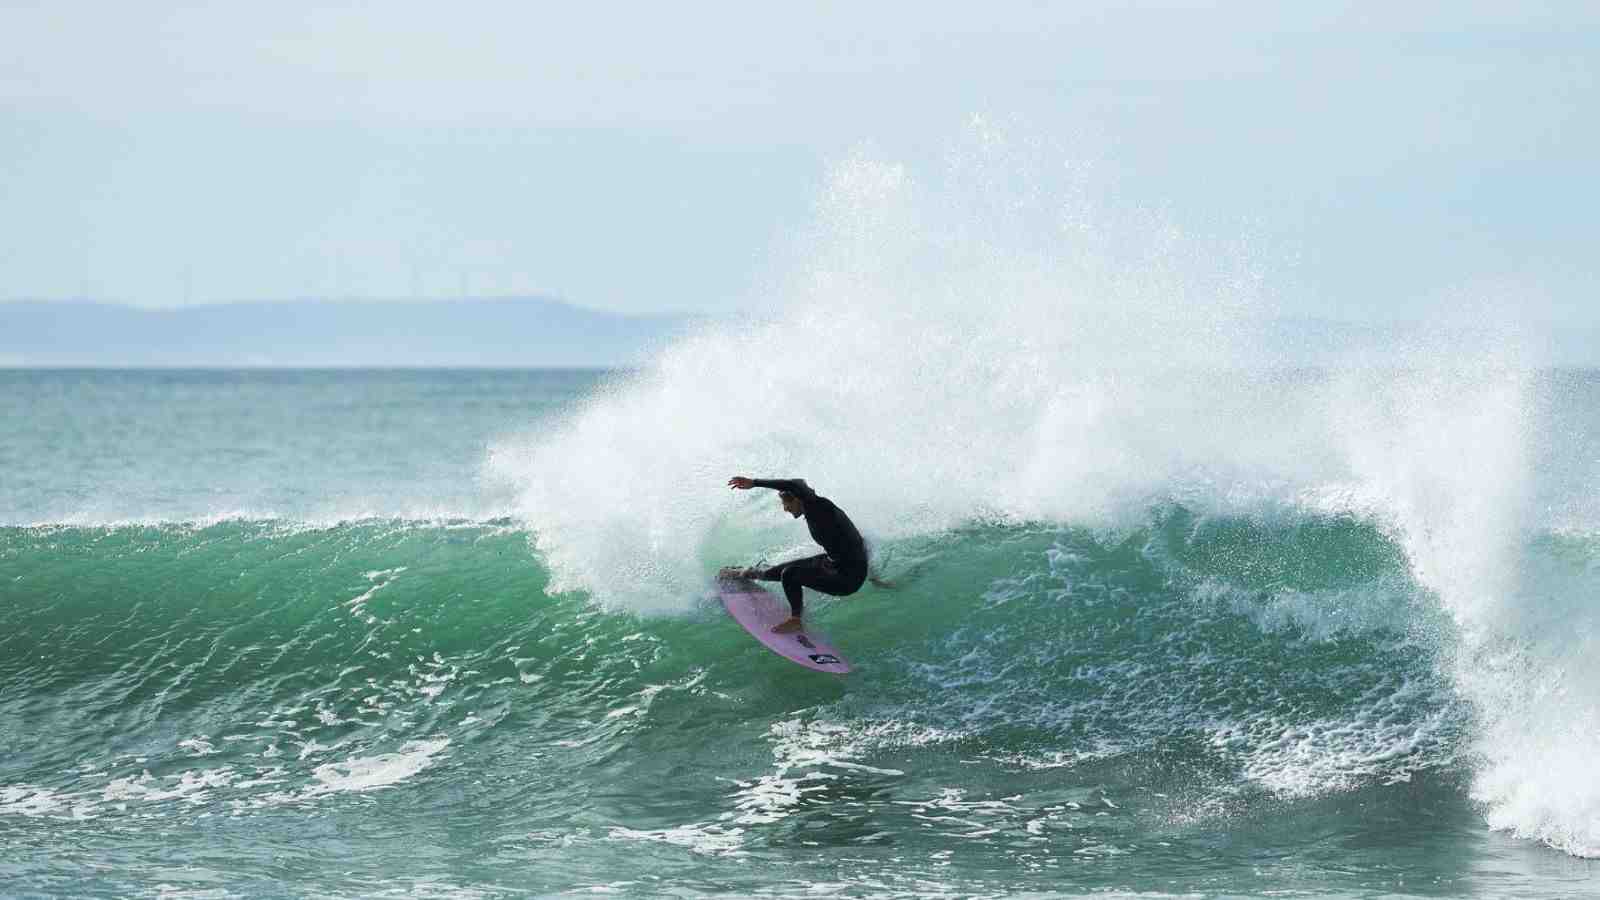 Which country has the best surfers?